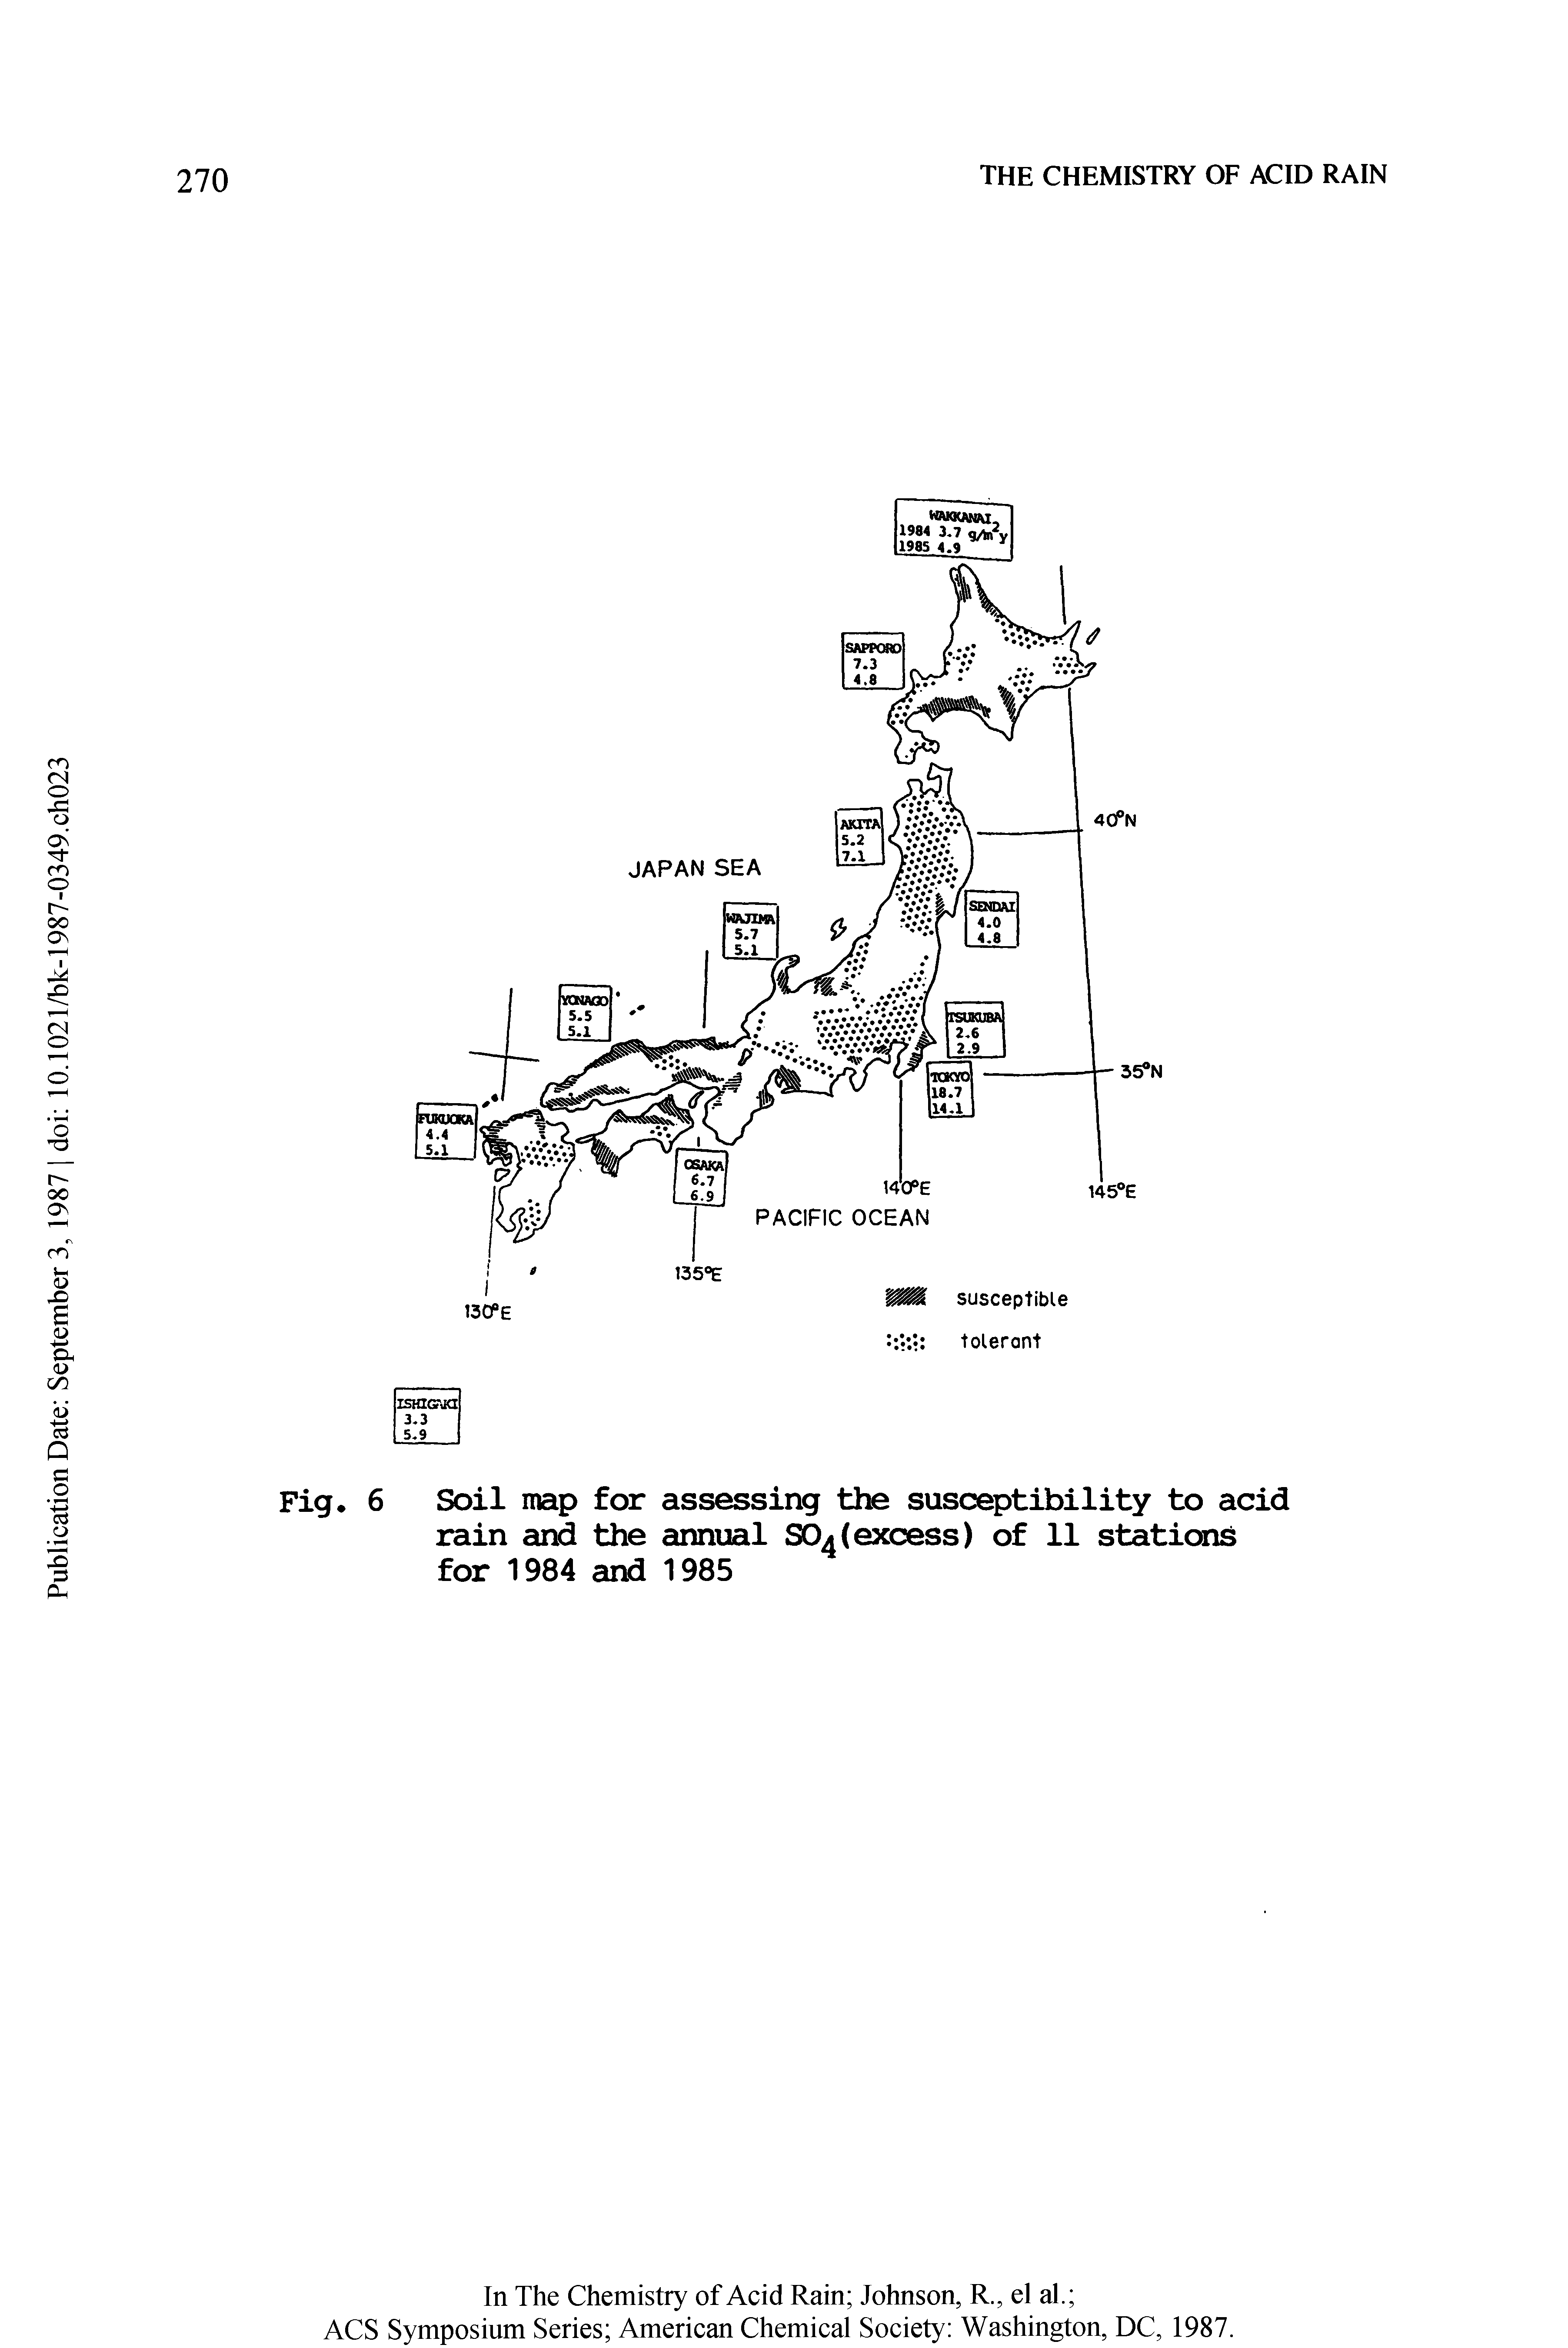 Fig. 6 Soil map for assessing the susceptibility to acid rain and the annual S04(excess) of 11 stations for 1984 and 1985...